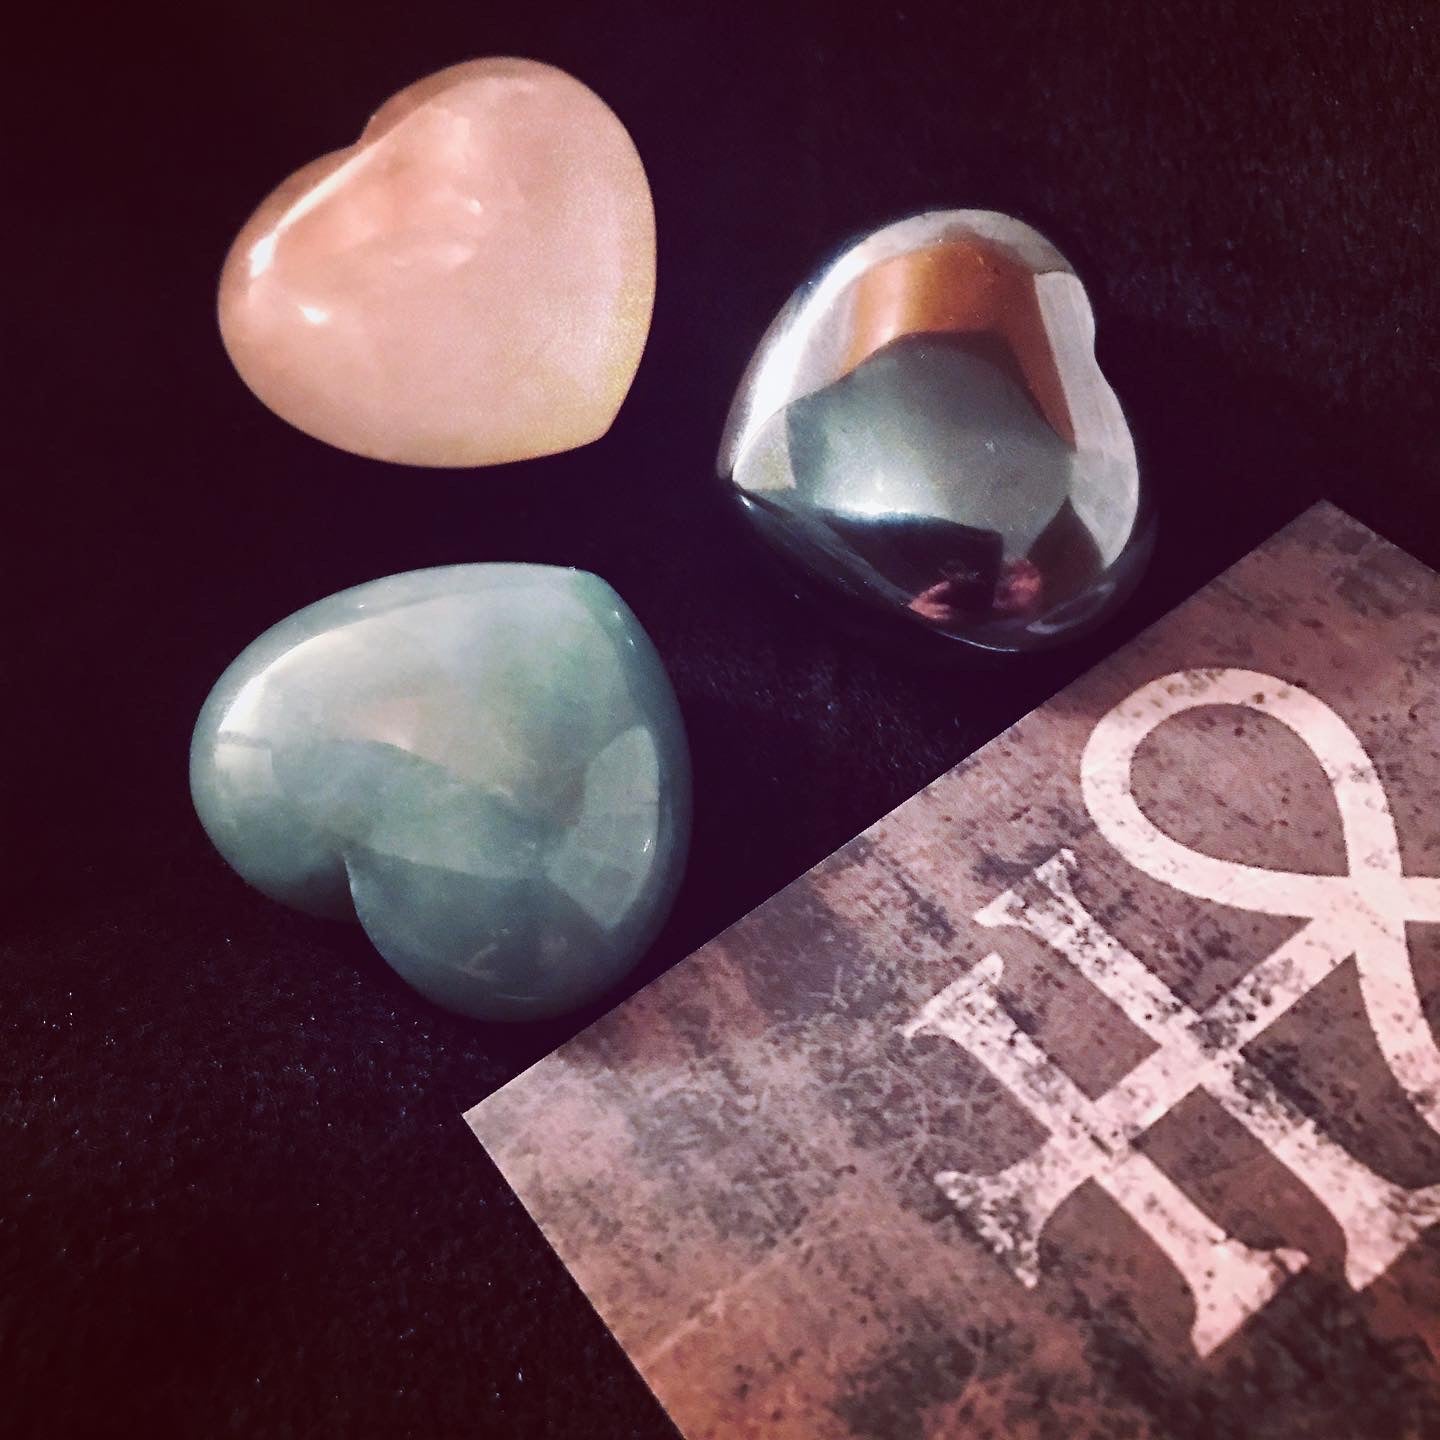 £20.00 Gift Vouchers – can be redeemed for a reading or purchase of crystals